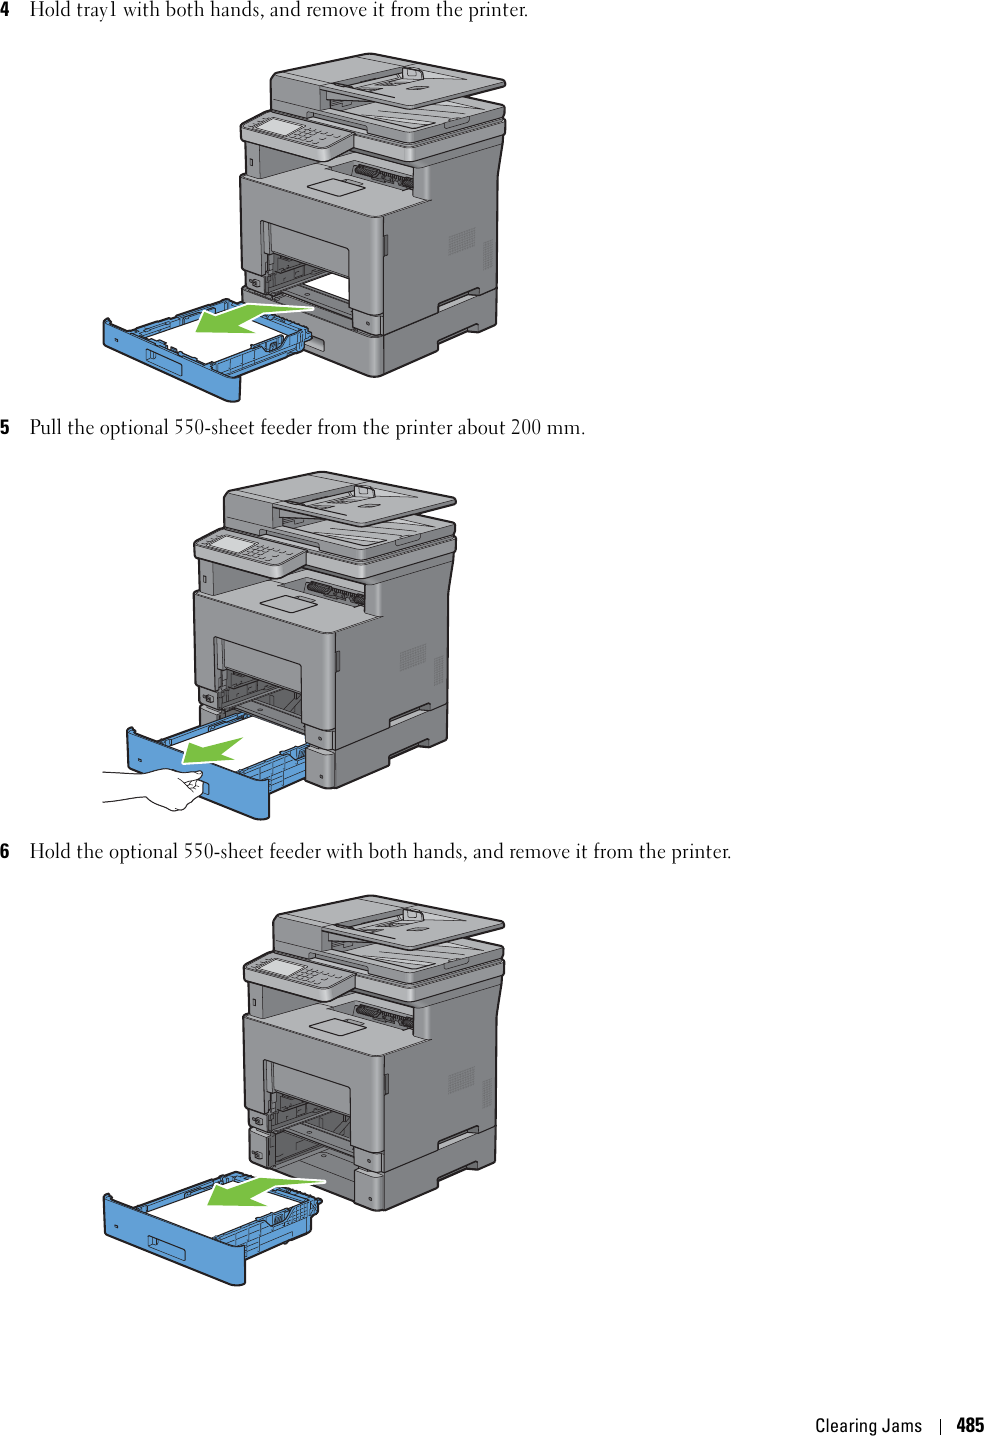 Clearing Jams4854Hold tray1 with both hands, and remove it from the printer.5Pull the optional 550-sheet feeder from the printer about 200 mm.6Hold the optional 550-sheet feeder with both hands, and remove it from the printer.